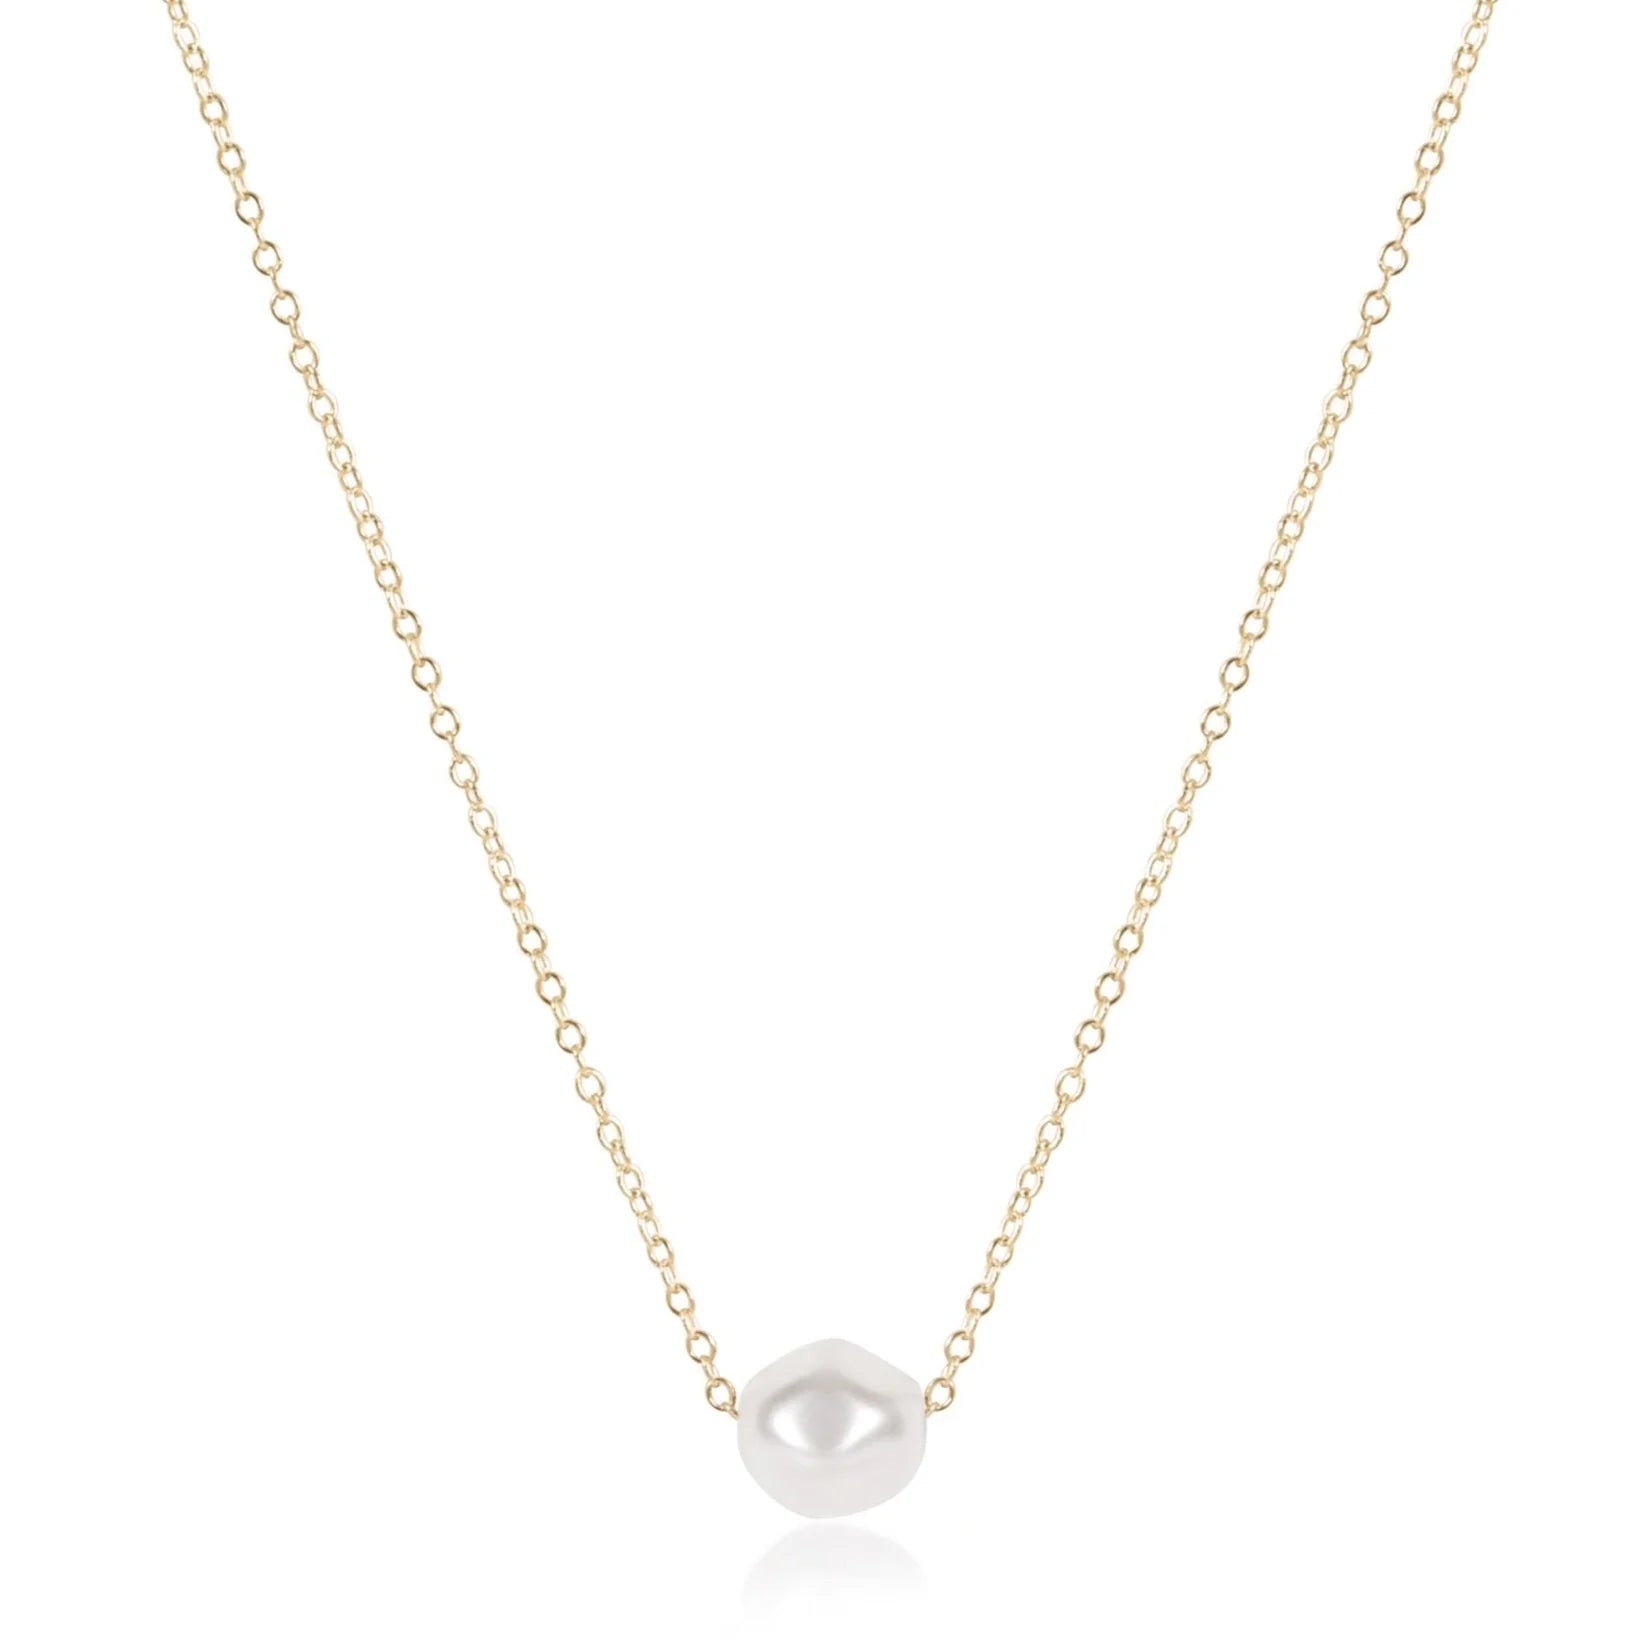 Pearl on Gold Chain Necklace